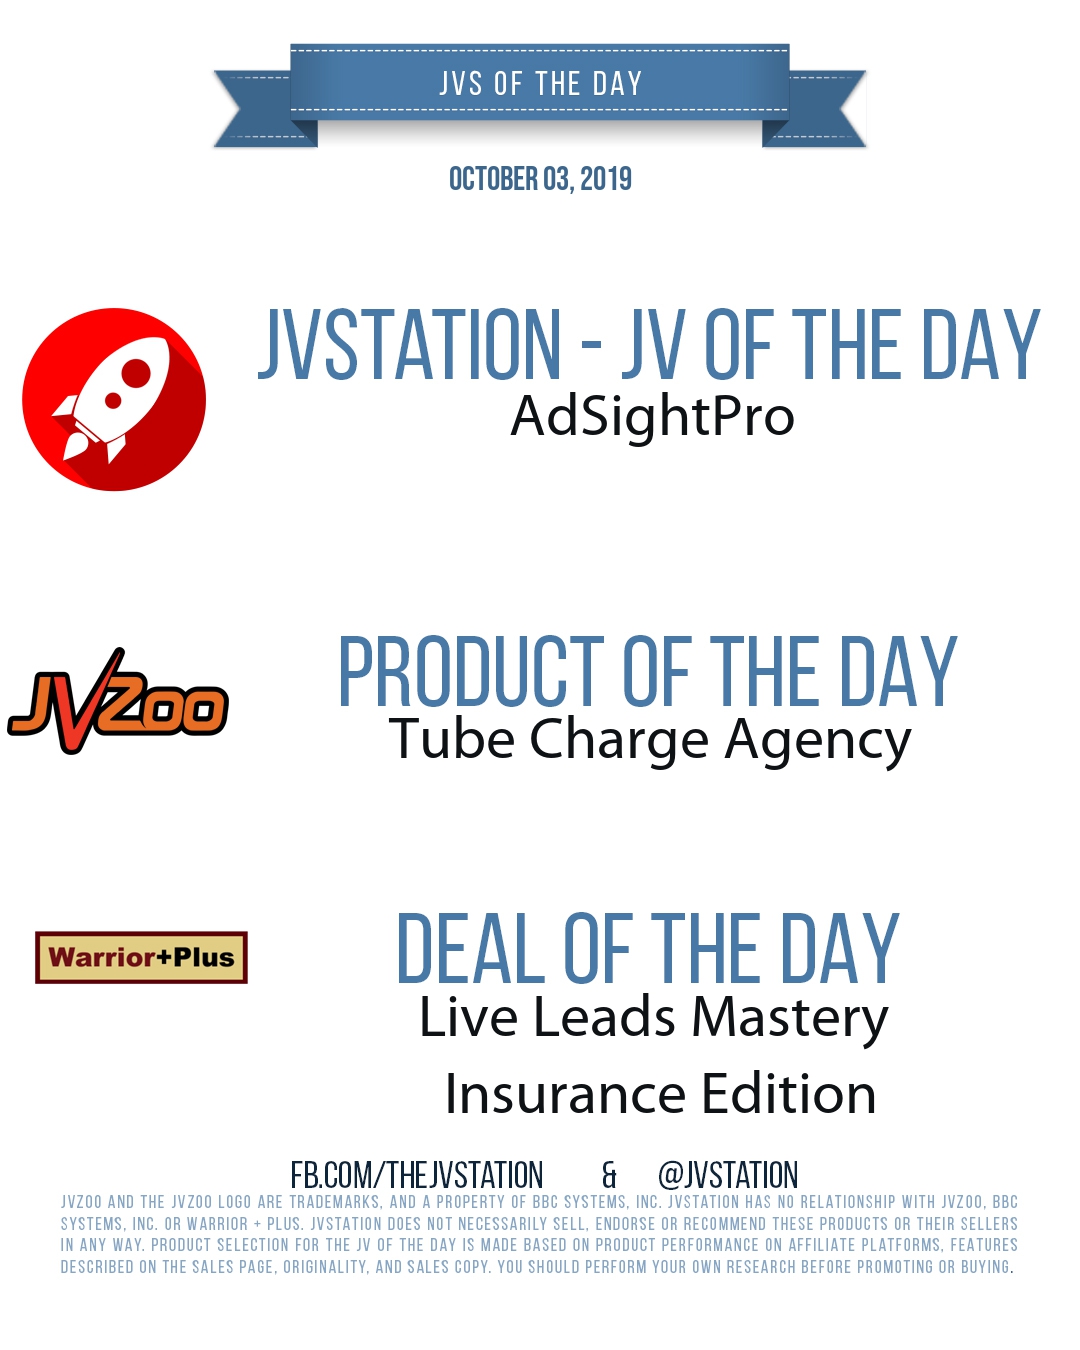 JVs of the day - October 03, 2019